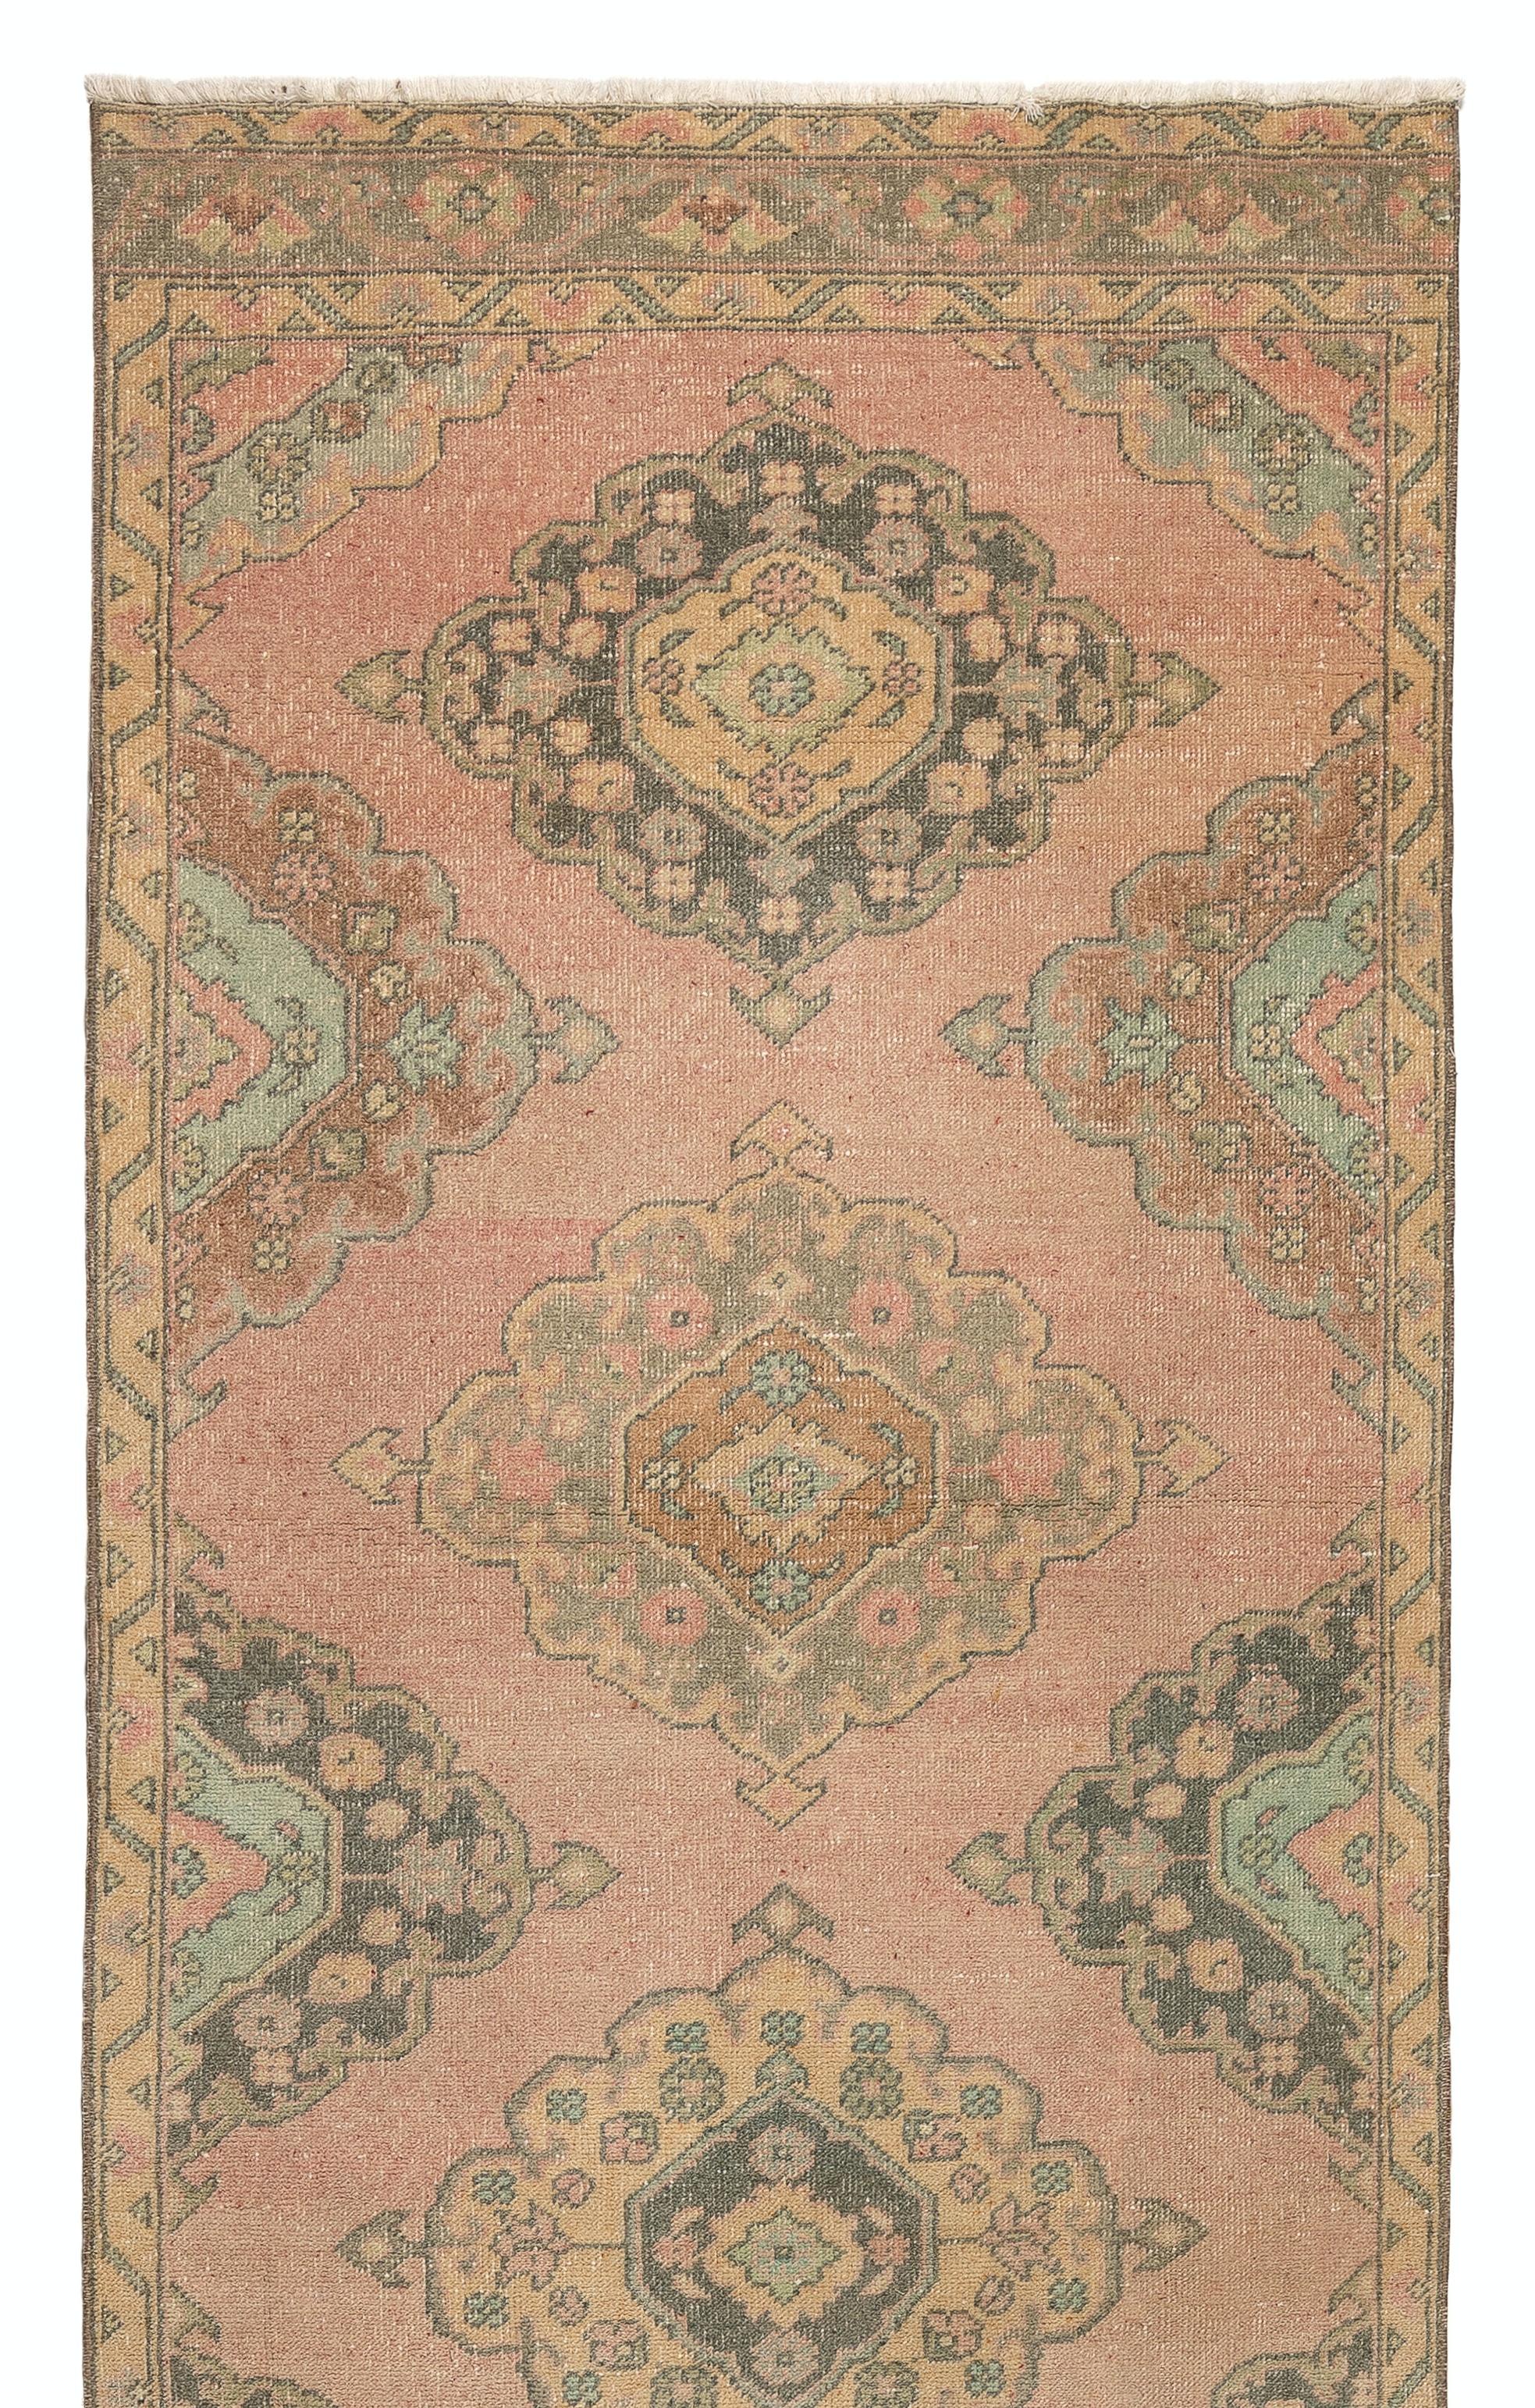 A vintage runner rug from Turkey. It is made of medium wool pile on wool foundation and features a design of multiple and half medallions running across the length of the rug in faded coral, light blue, gray and rust colors. Measures: 3.7 x 11.2